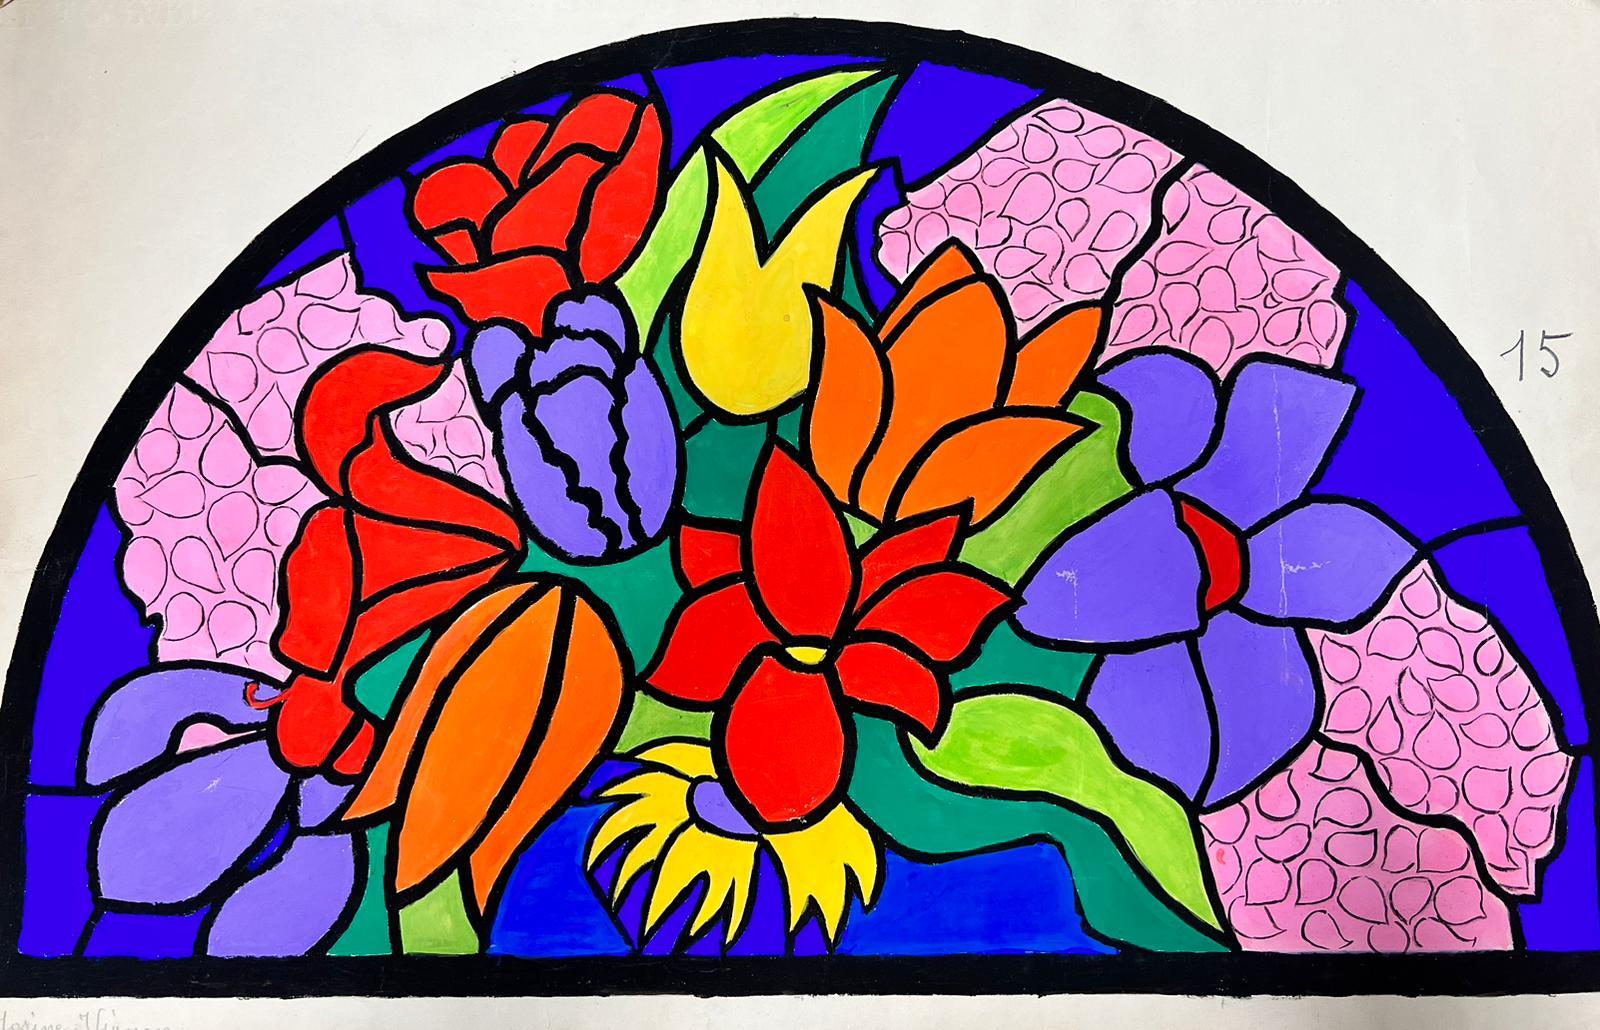 Mid Century French Illustration Of A Floral Stained Glass Window Sketch